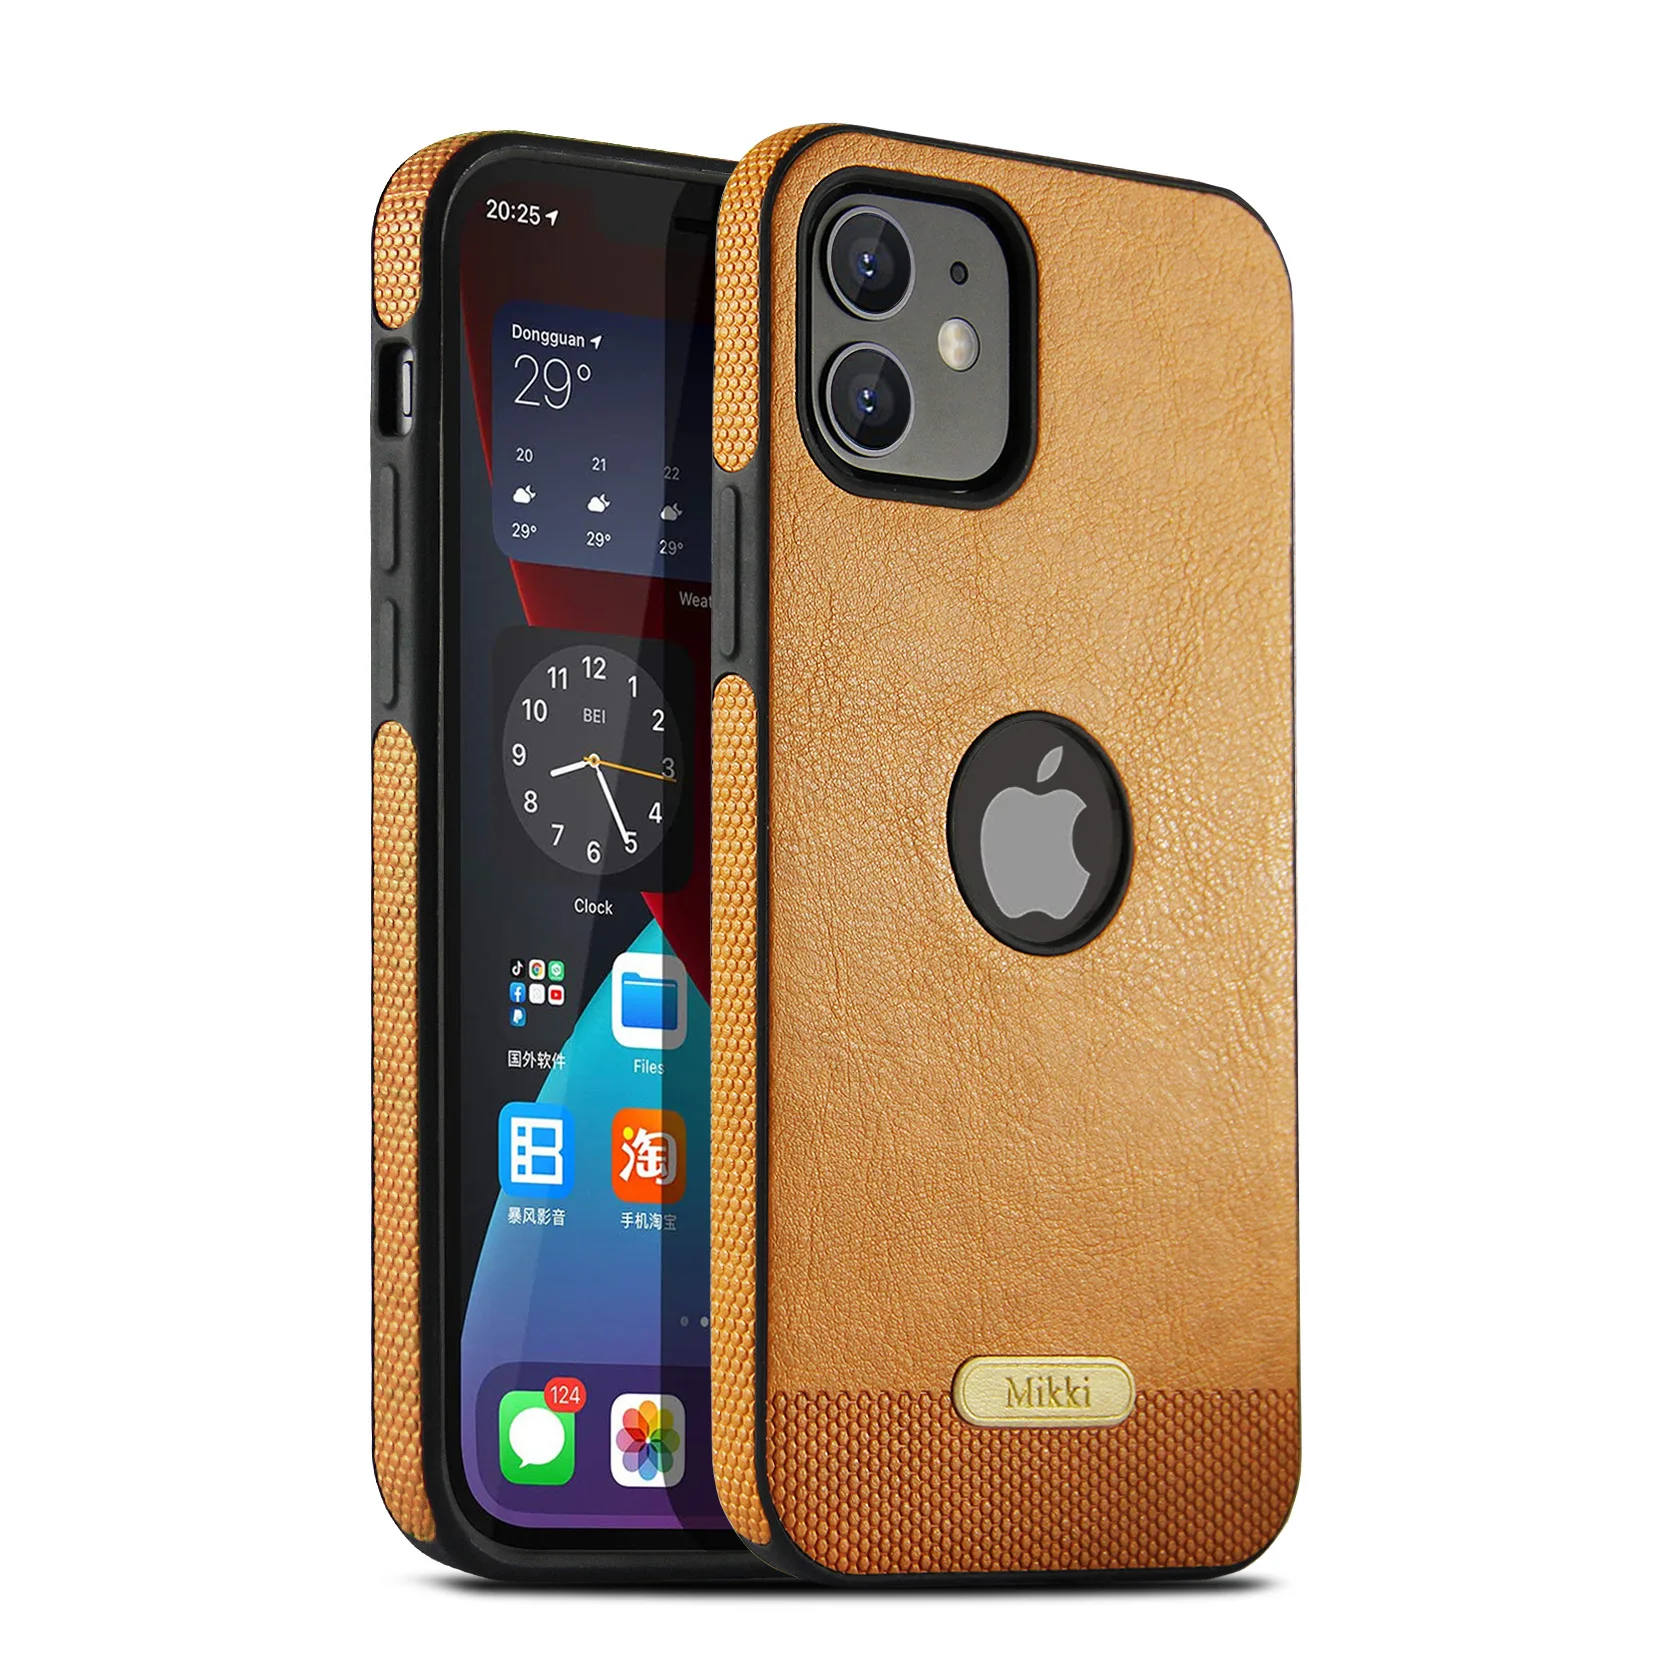 Business Stitching PU Leather Soft Slim Case Protective Mobile Phone Cover Case For Iphone 12 Pro iPhone 13 11